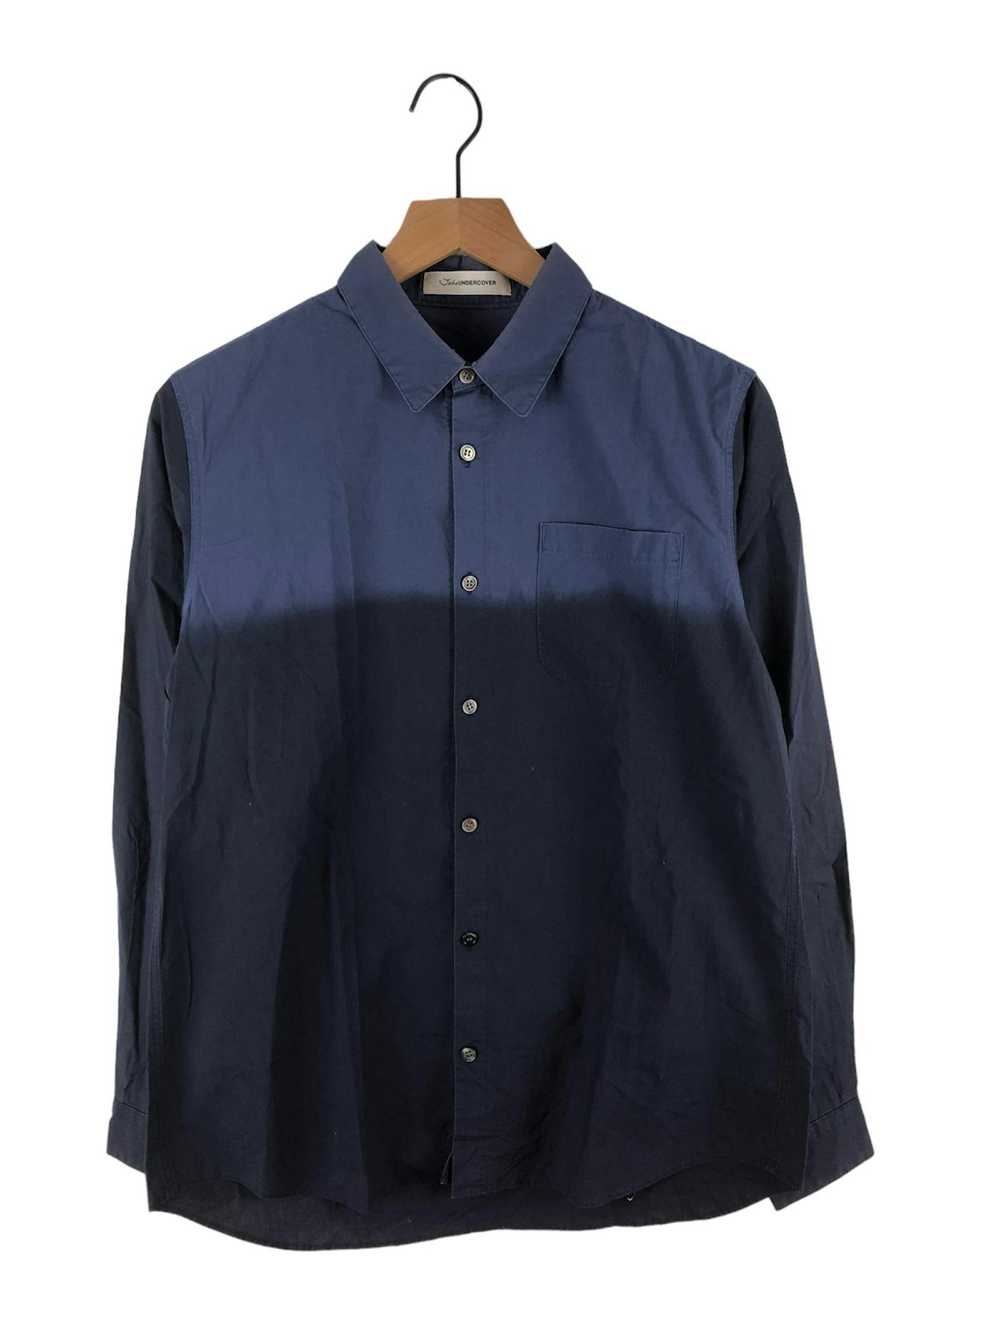 Undercover John Undercover Button Up Shirts - image 1